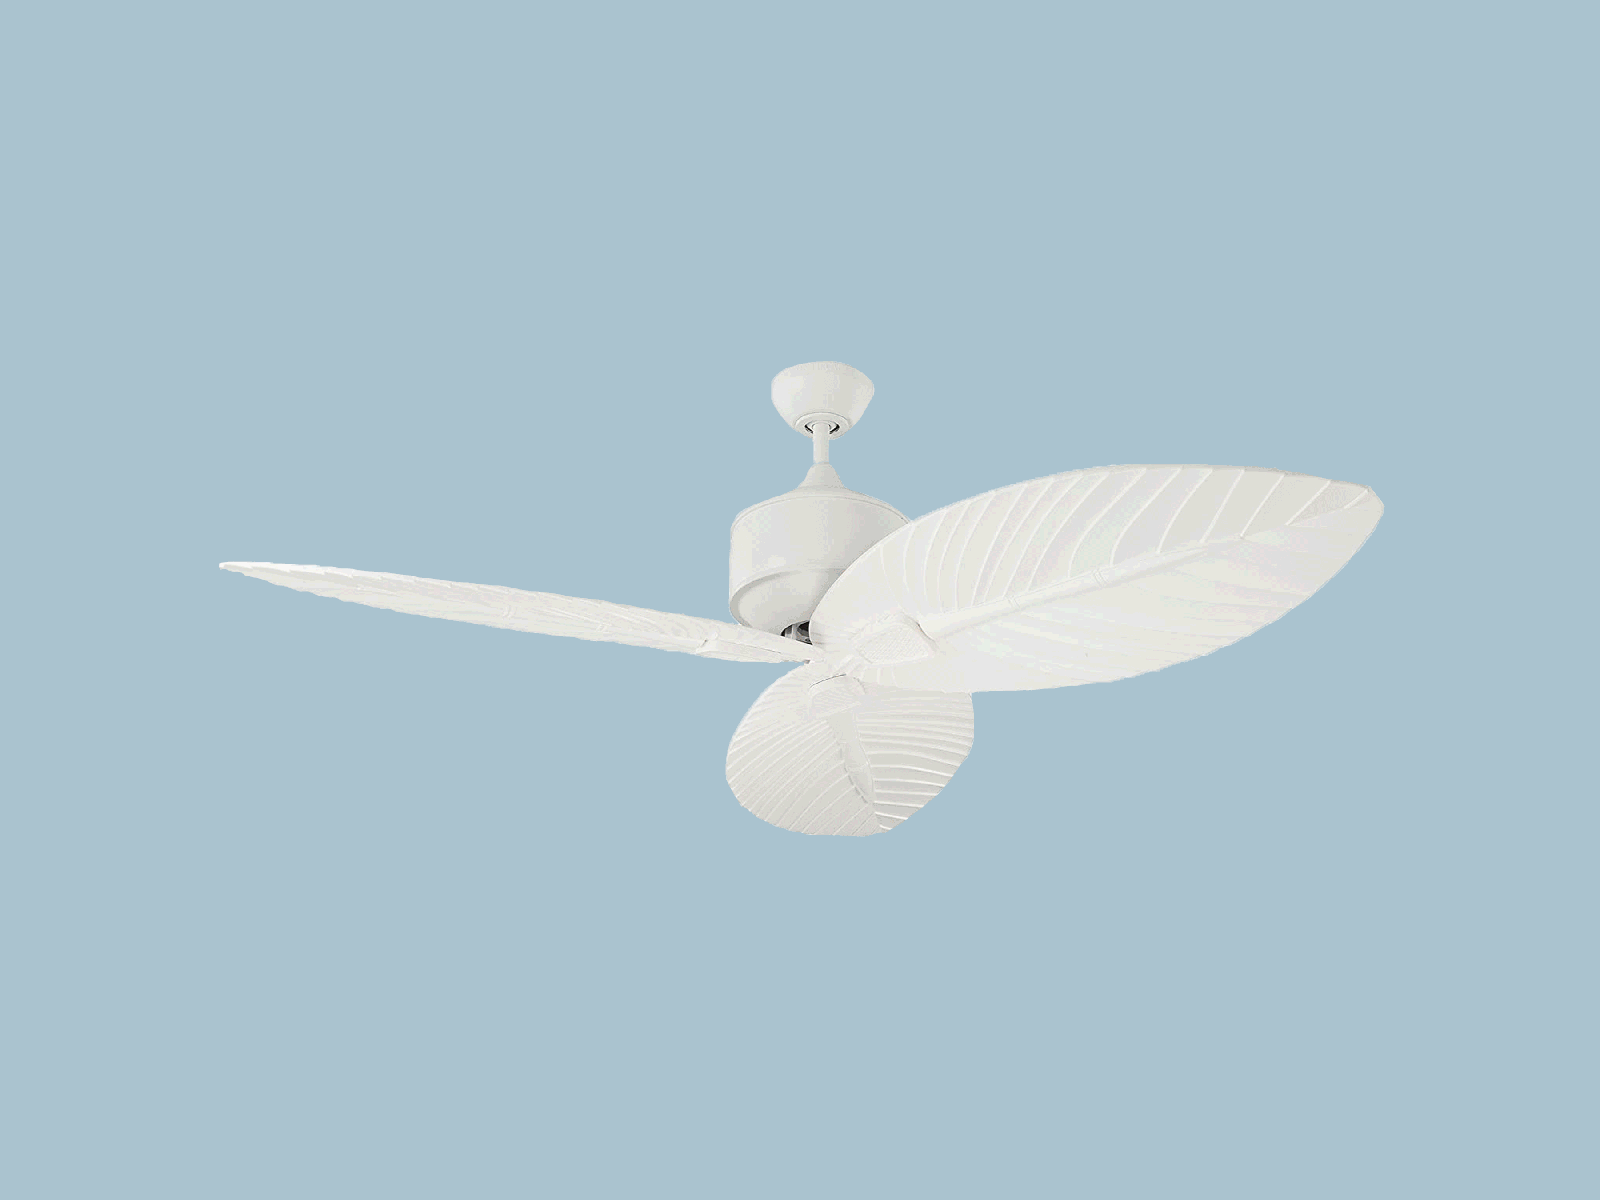 14 Ceiling Fans That Deliver on Style